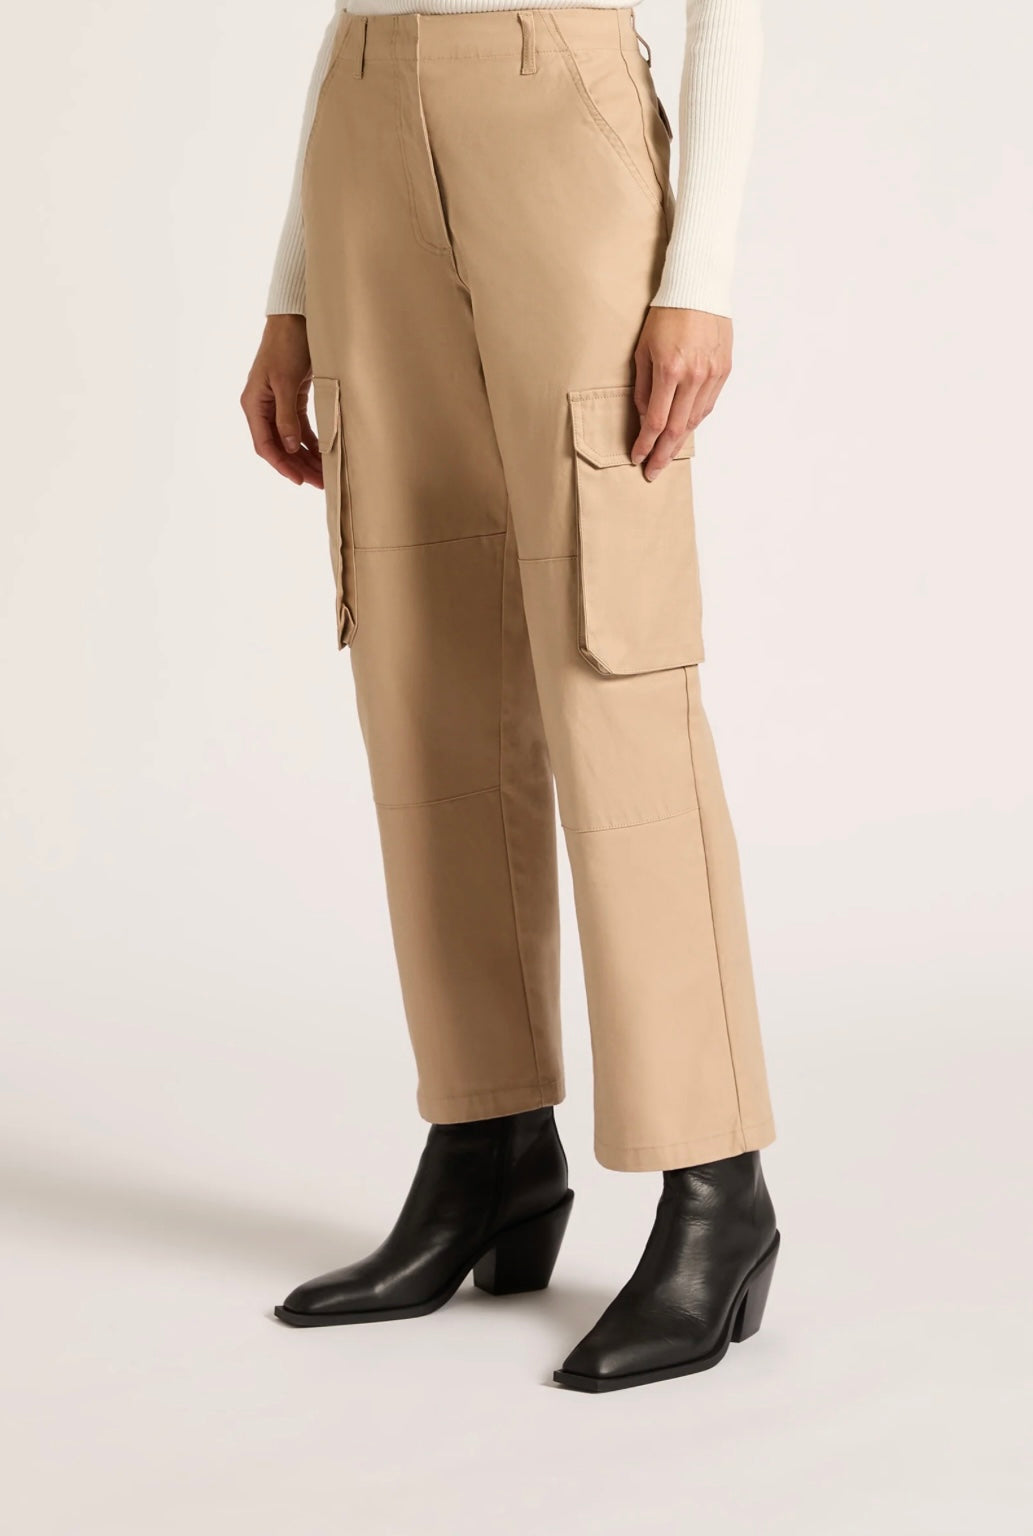 Nude Lucy Diego Pant in Tan